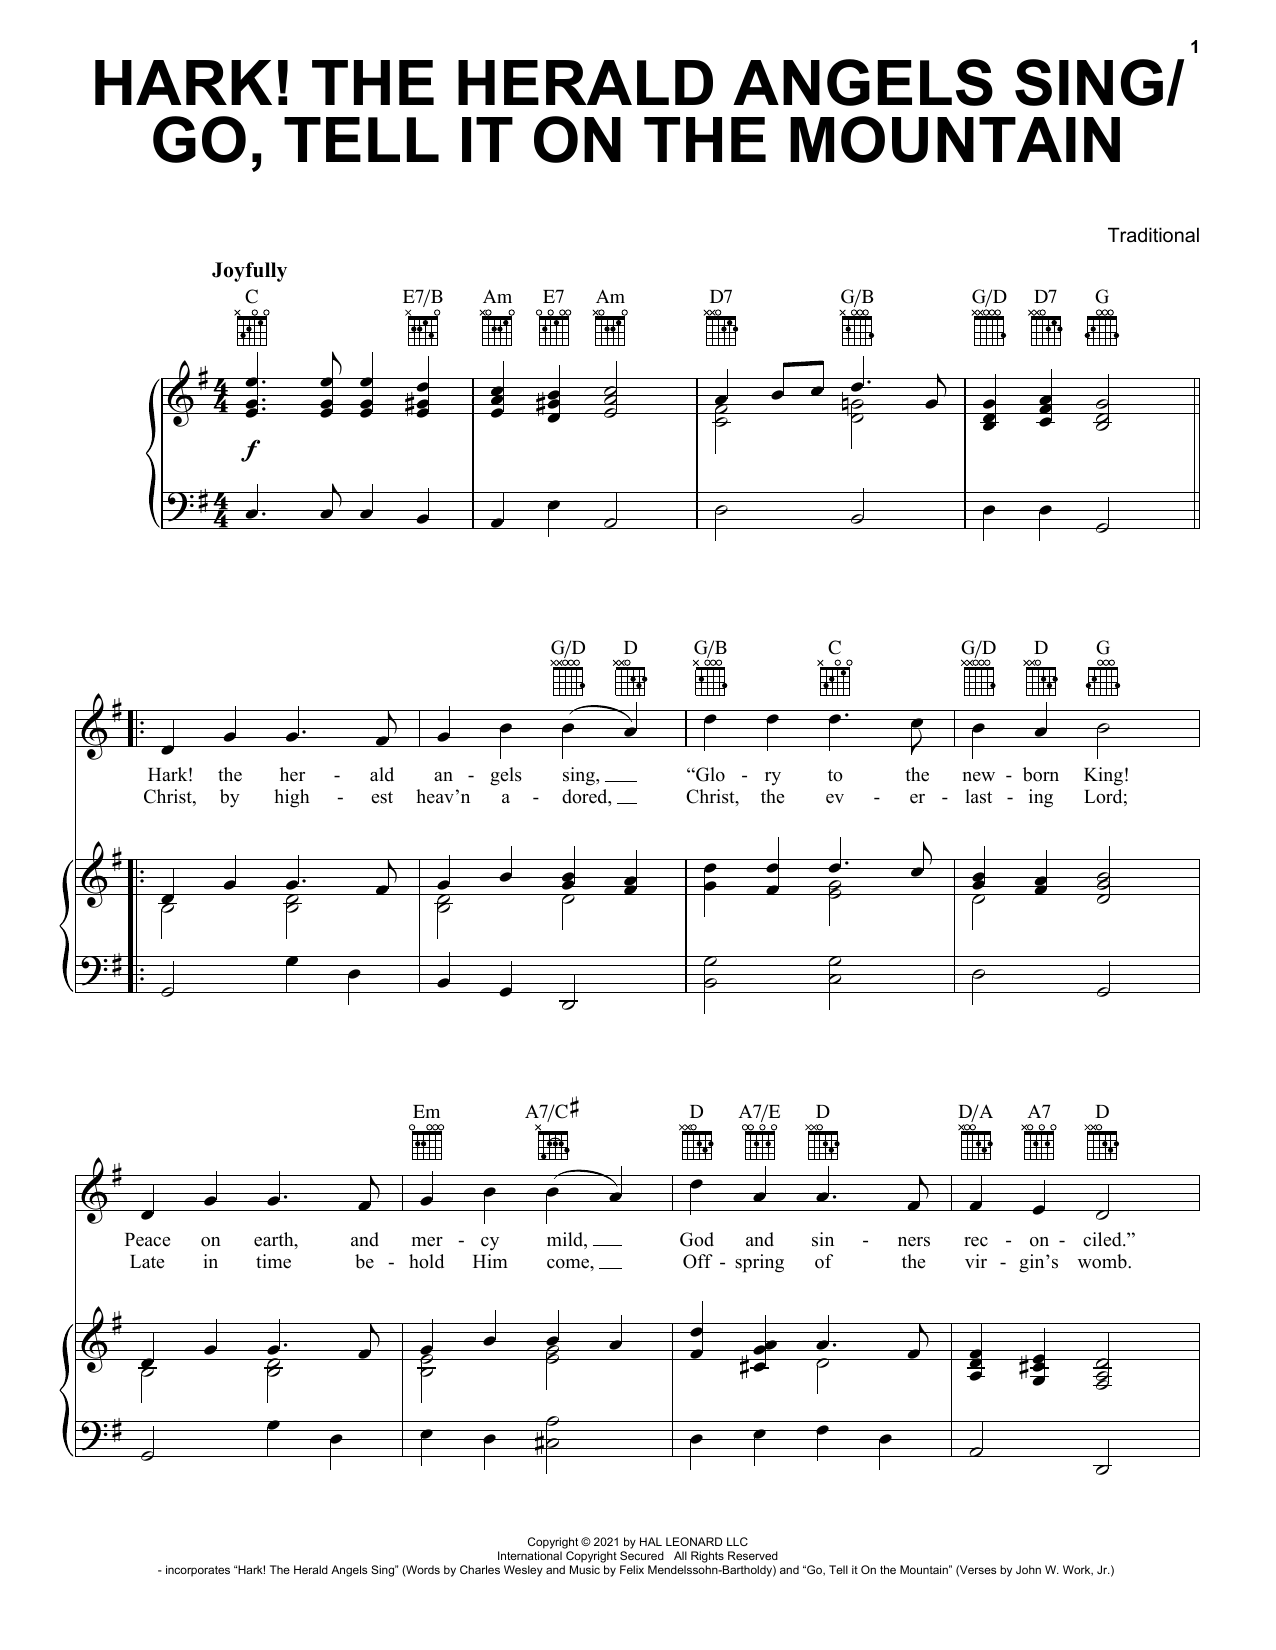 Download Various Hark! The Herald Angels Sing / Go, Tell Sheet Music